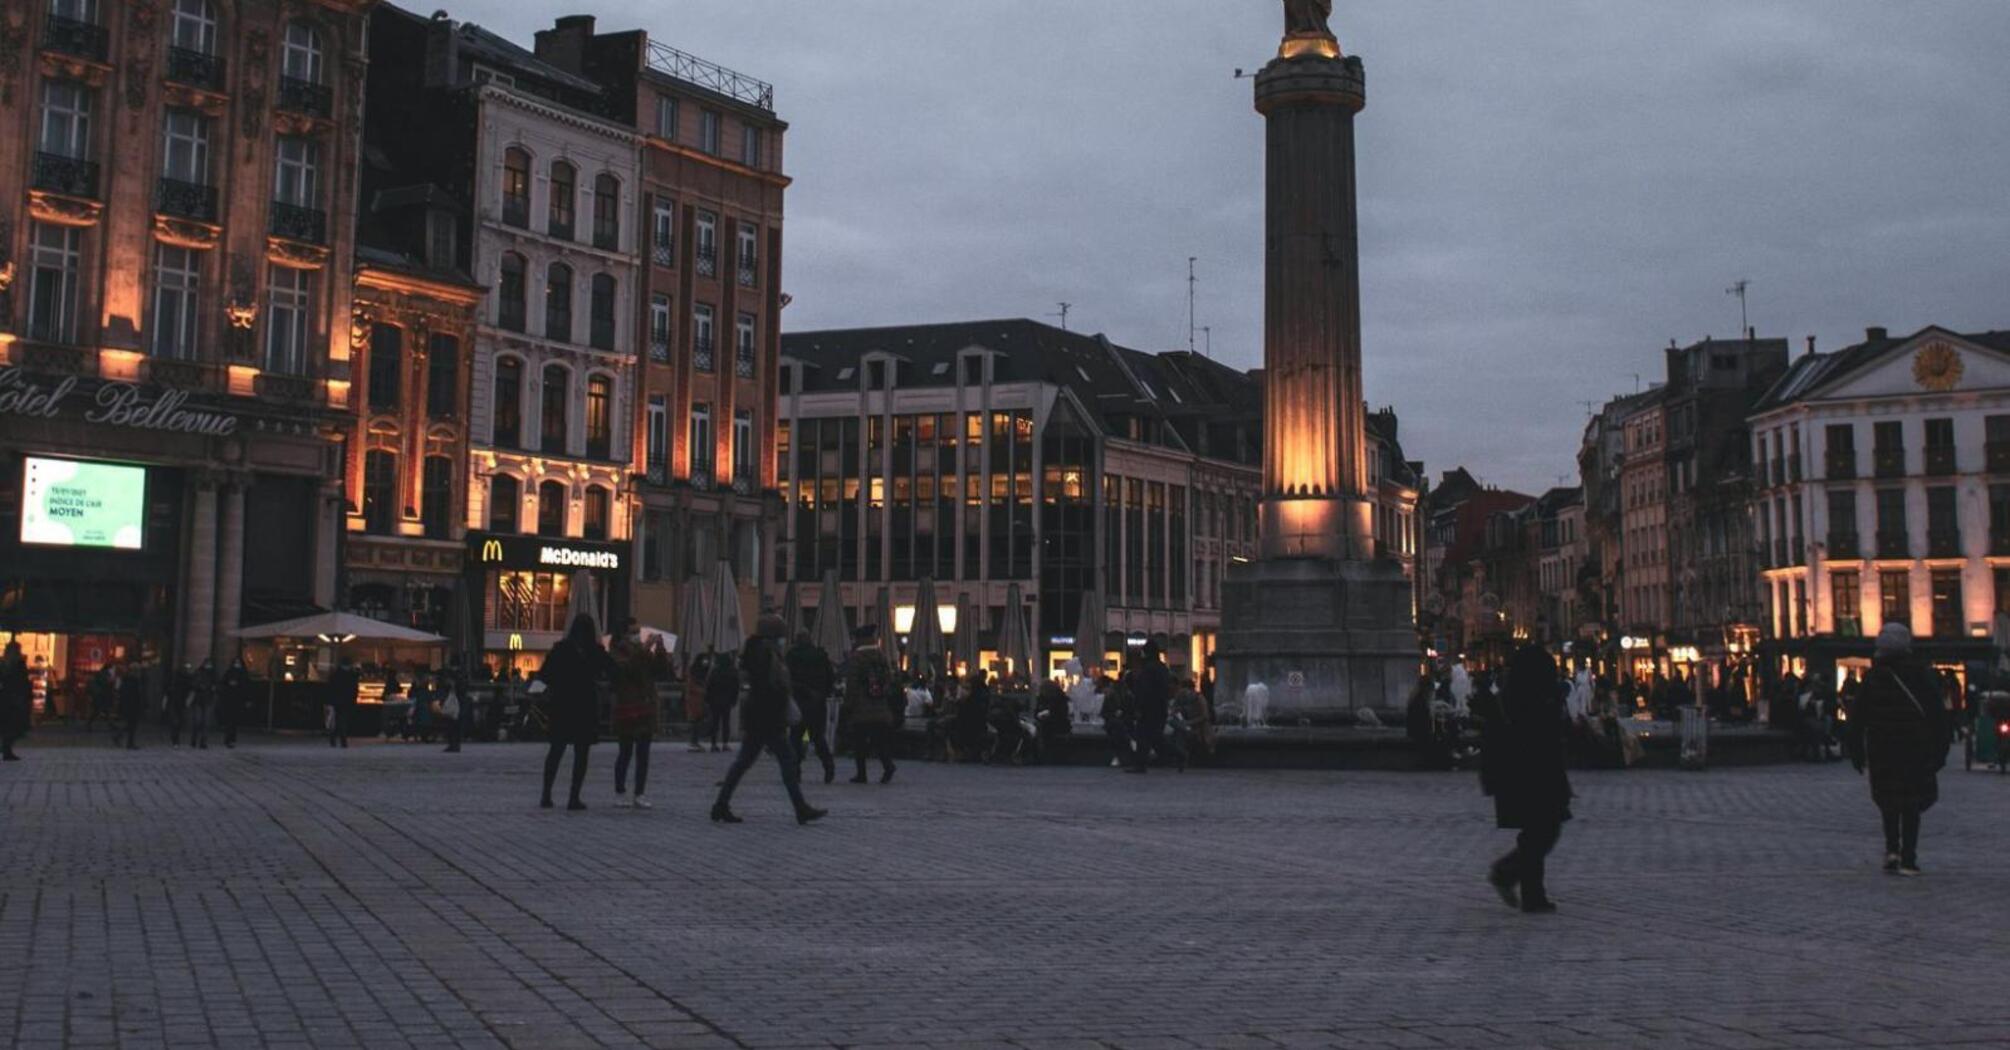 Evening view of a busy square in a French city with a tall statue and illuminated buildings